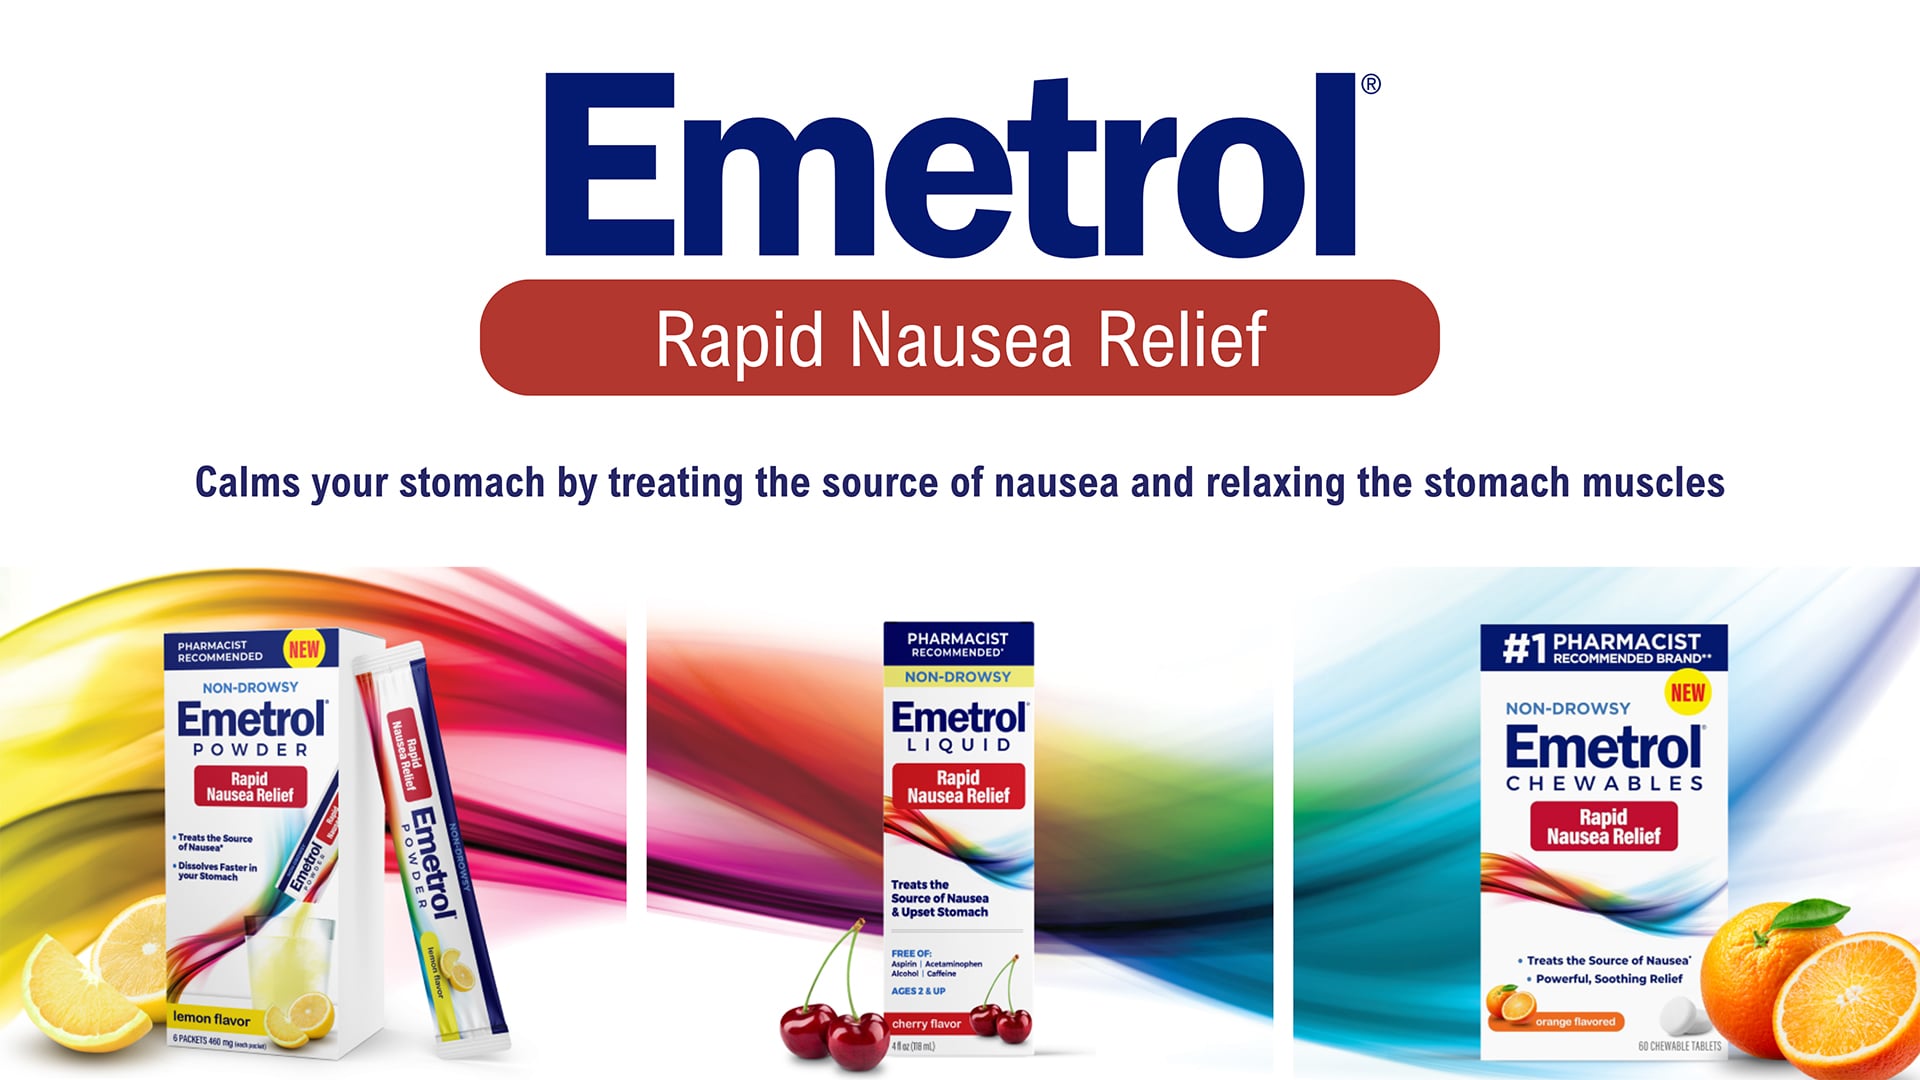 Emetrol's family of nausea relief products. Text states 'Calms your stomach by treating the source of nausea and relaxing the stomach muscles,' with images of Emetrol Powder in lemon flavor, Emetrol Liquid in cherry flavor, and Emetrol Chewables in orange flavor, each beside corresponding fruit slices.